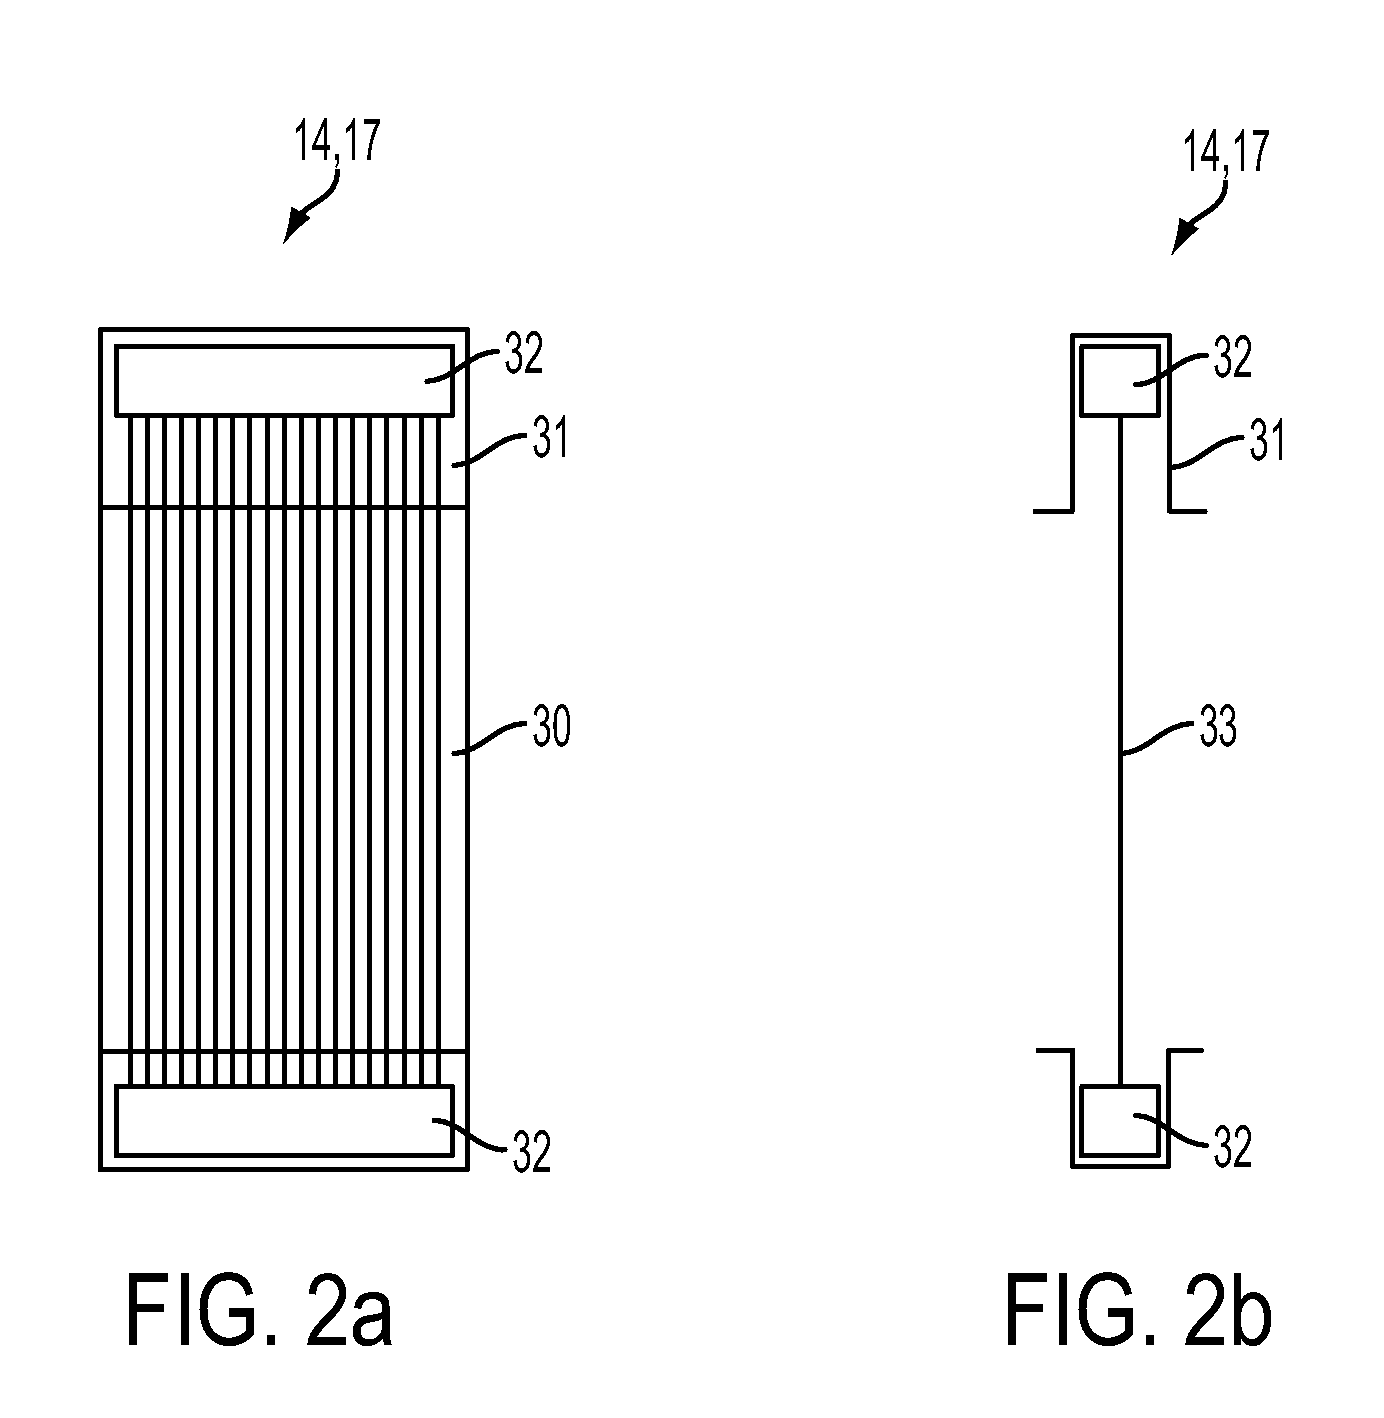 Water-conducting household appliance and method for the operation thereof